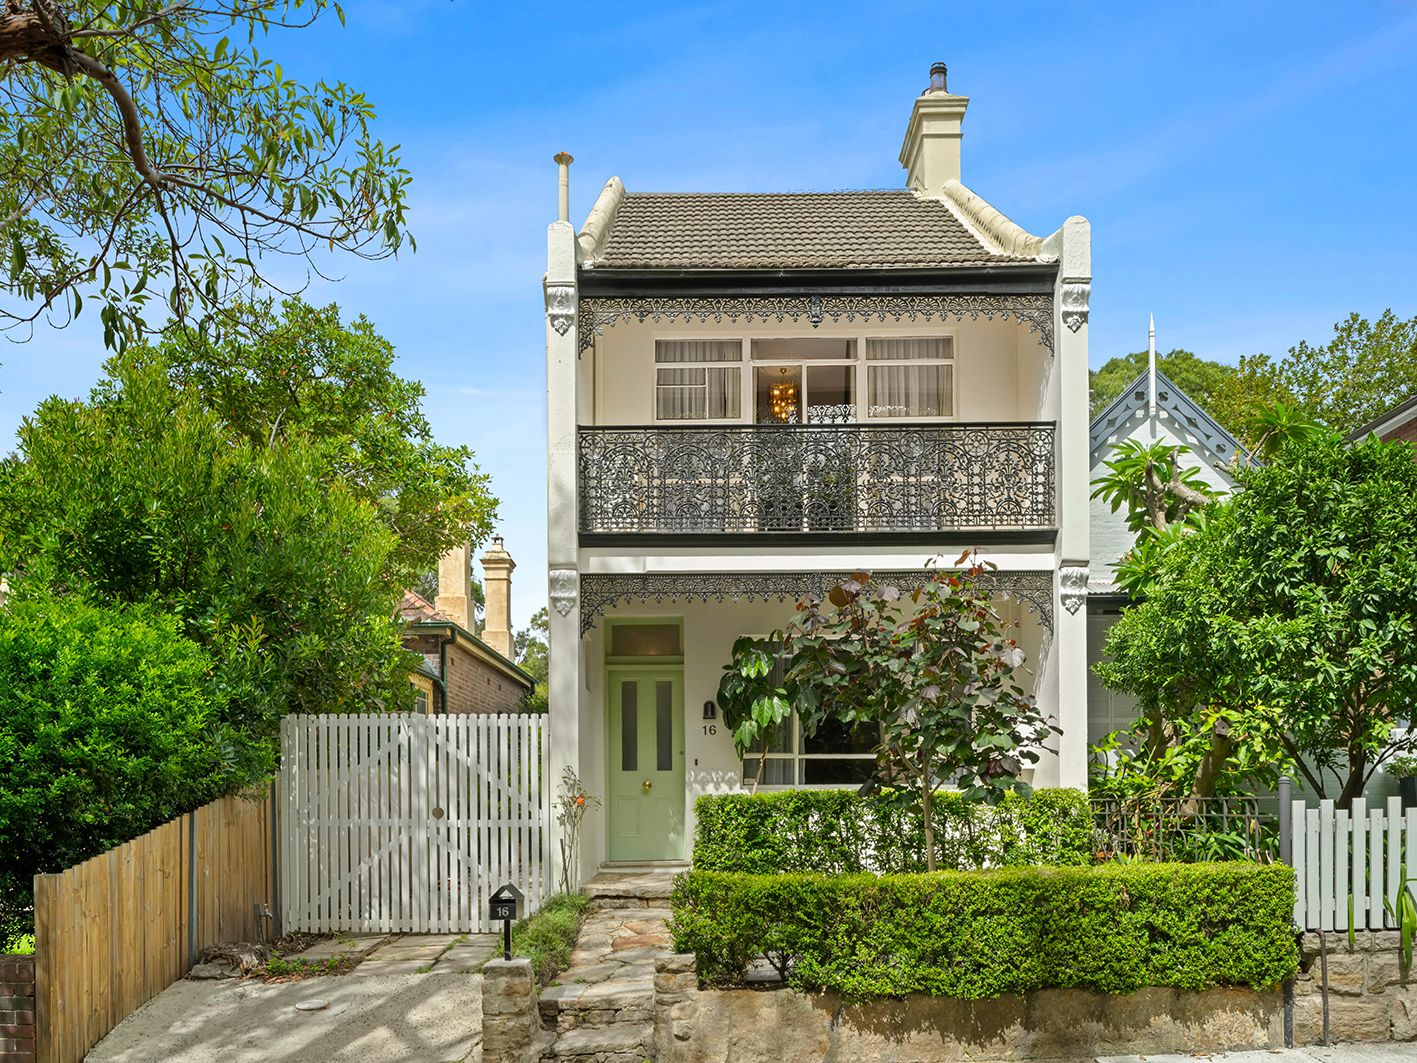 3 bedrooms House in 16 Kensington Road SUMMER HILL NSW, 2130